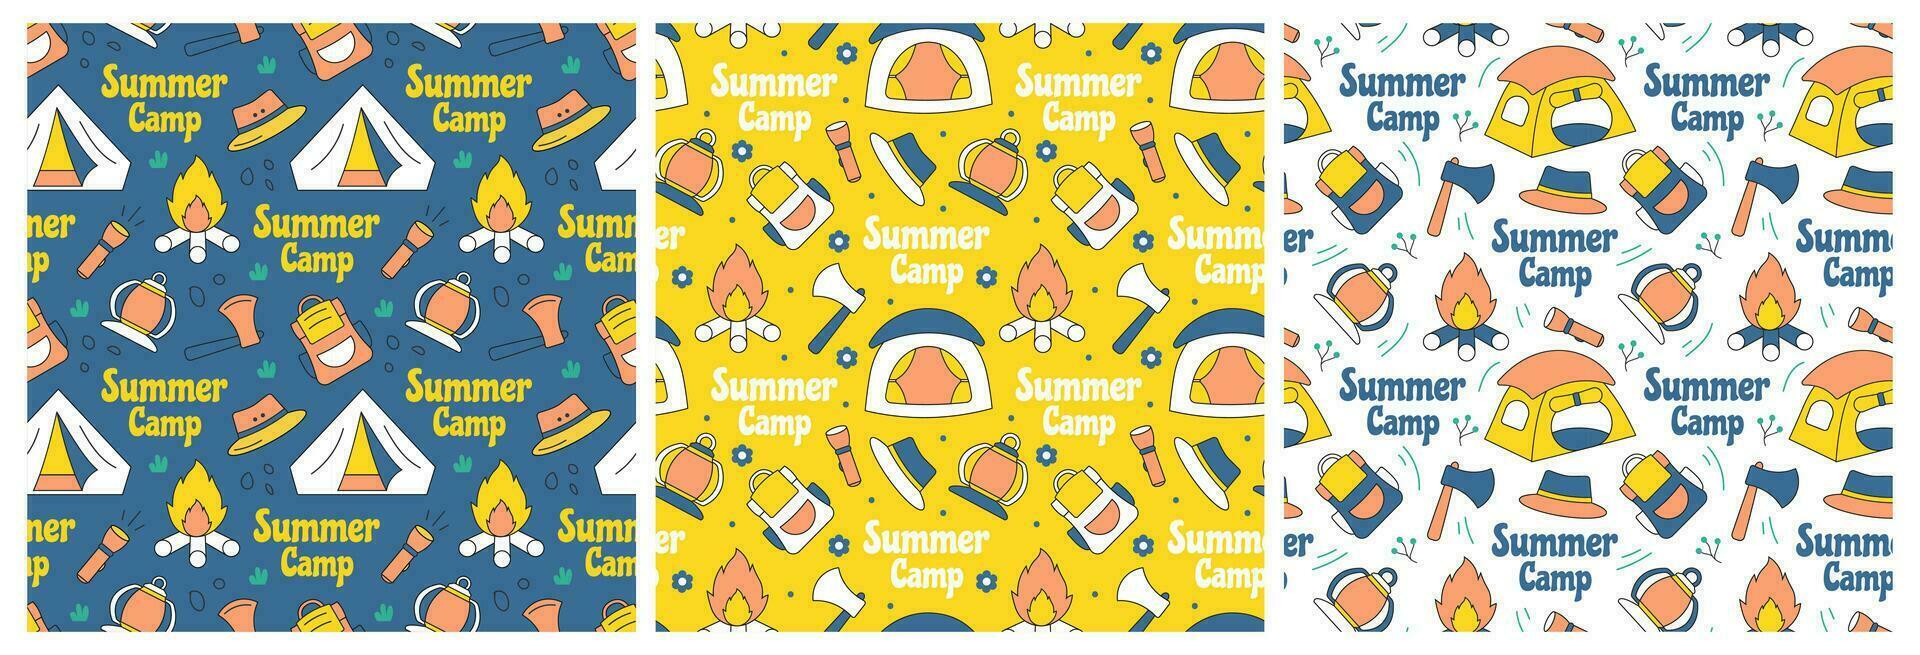 Set of Summer Camp Seamless Pattern Design of Camping and Traveling Element in Template Hand Drawn Cartoon Flat Illustration vector